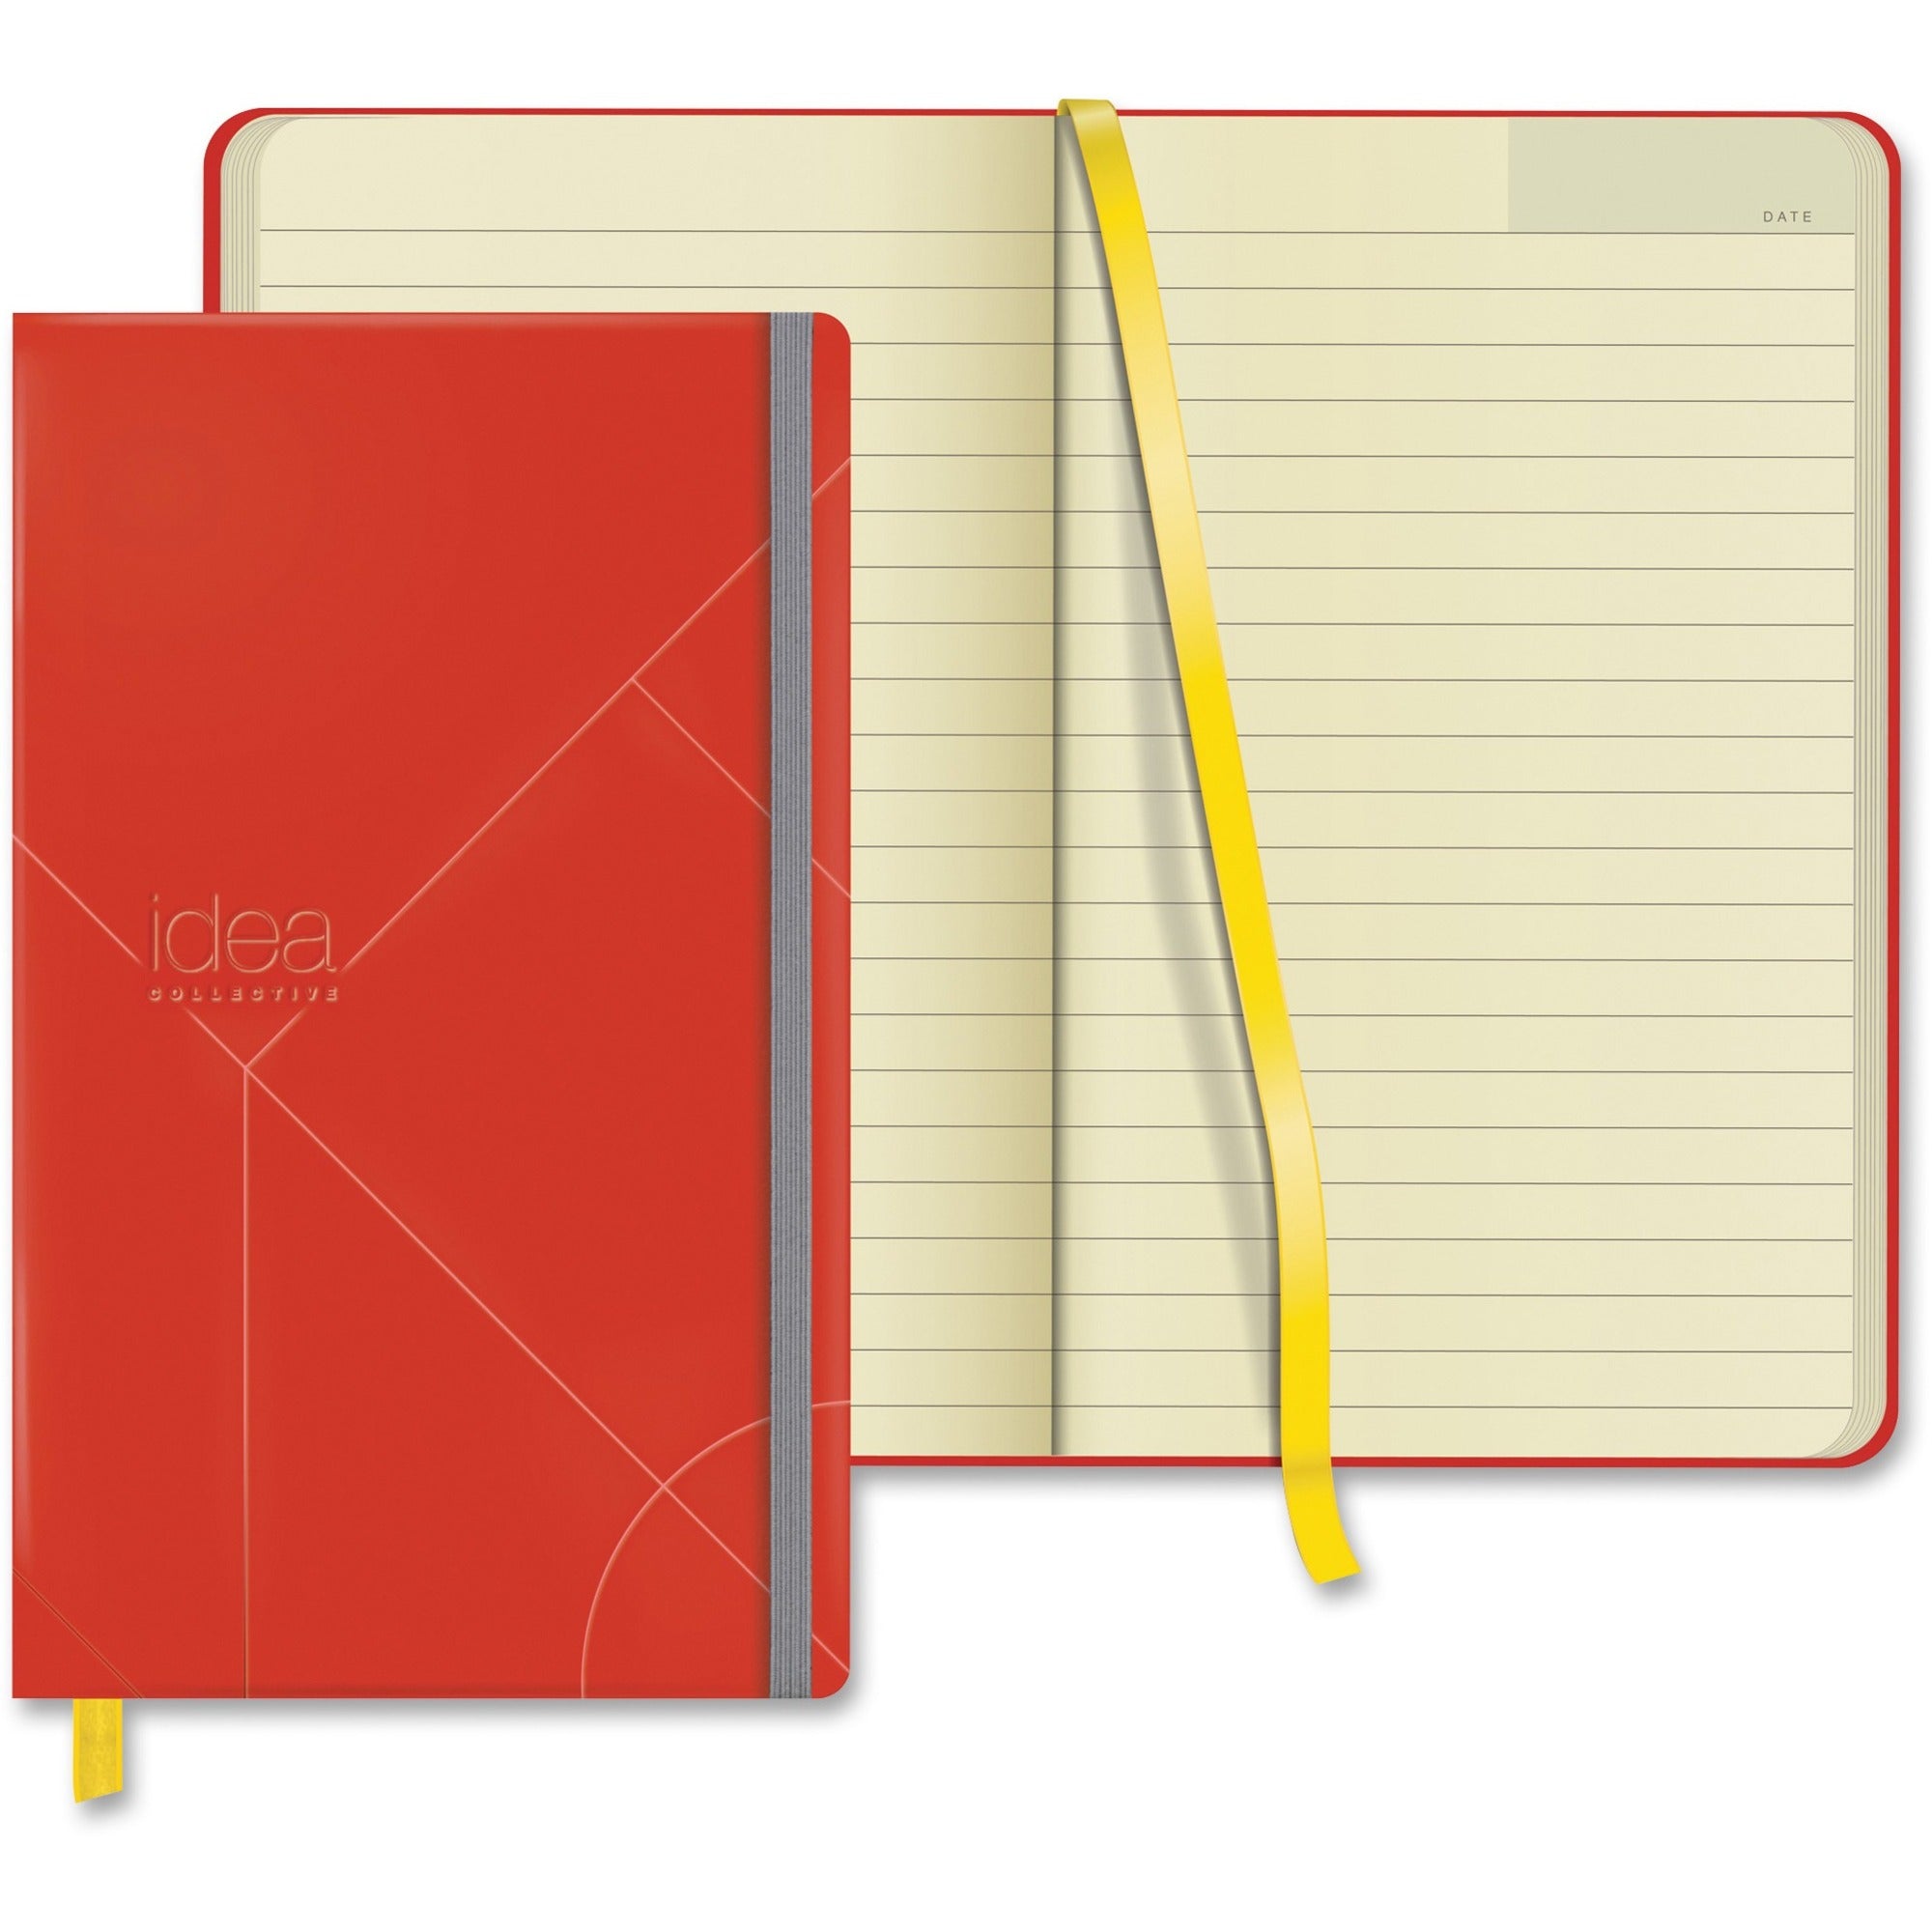 TOPS Idea Collective Hard Cover Journal - 120 Sheets - 5" x 8 1/4" - 0.63" x 5" x 8.3" - Cream Paper - Red Cover - Acid-free, Durable Cover, Ribbon Marker, Elastic Closure, Pocket - 1 Each - 